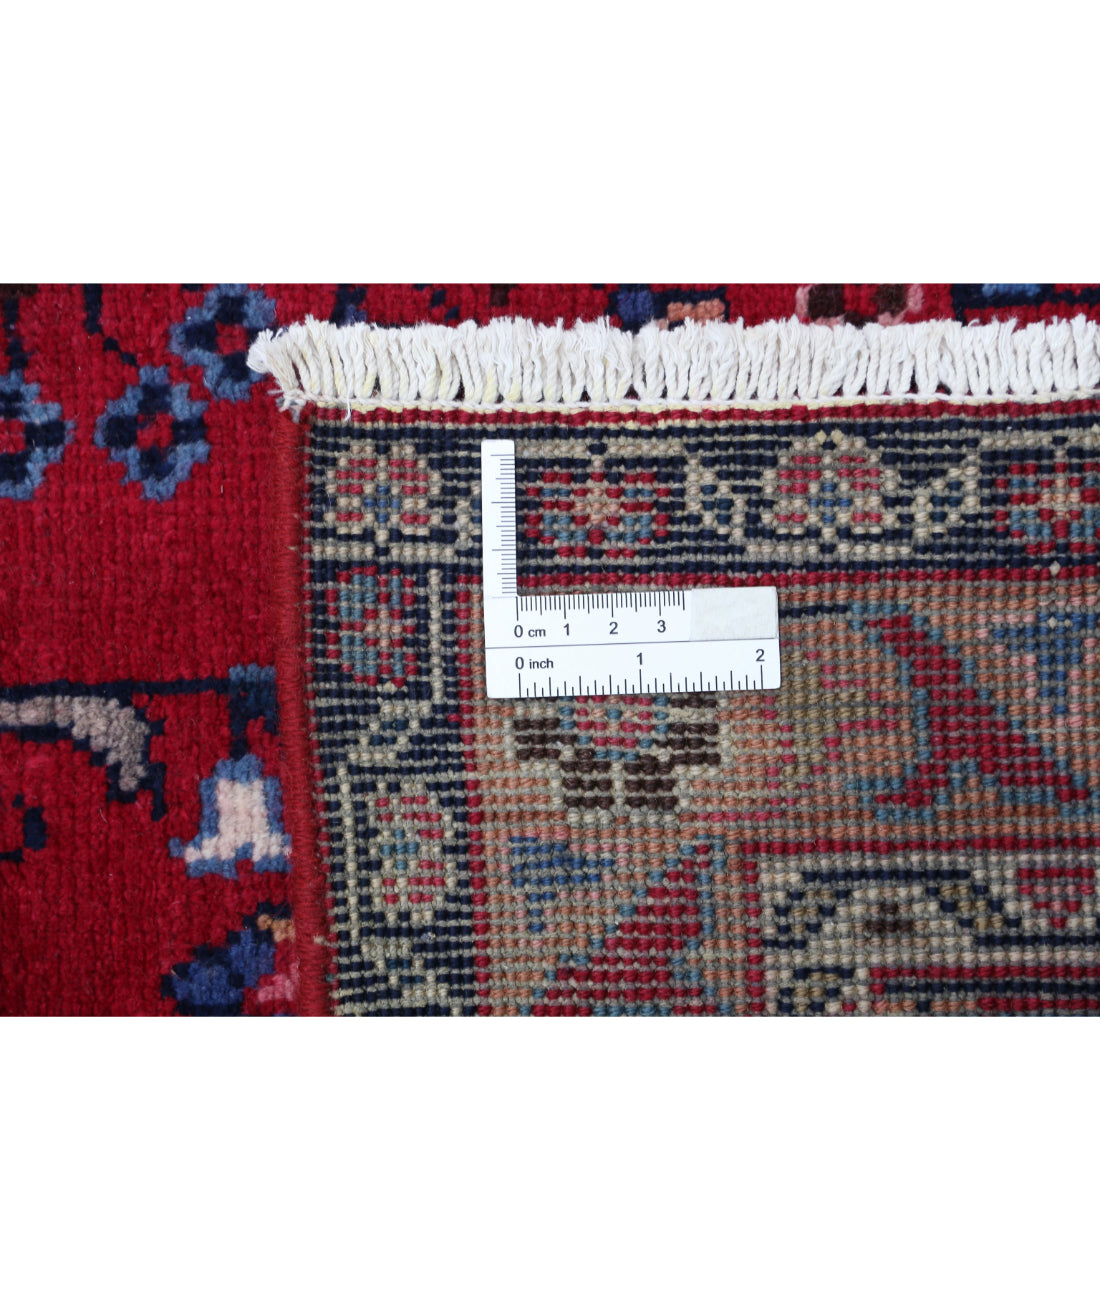 Hand Knotted Persian Mashad Wool Rug - 6'4'' x 9'4'' 6'4'' x 9'4'' (190 X 280) / Red / Blue